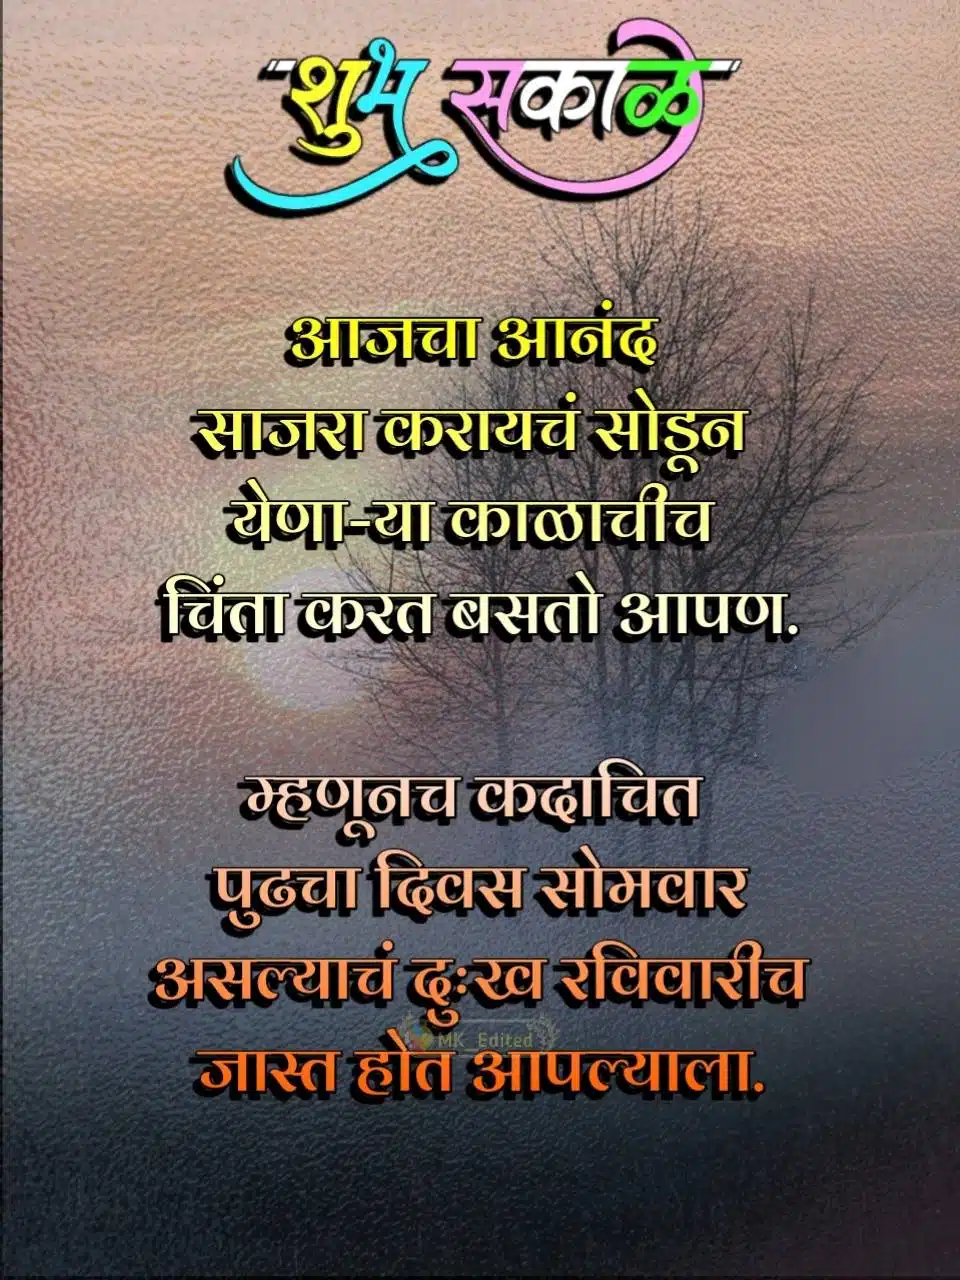 Good Morning Positive Thoughts In Marathi